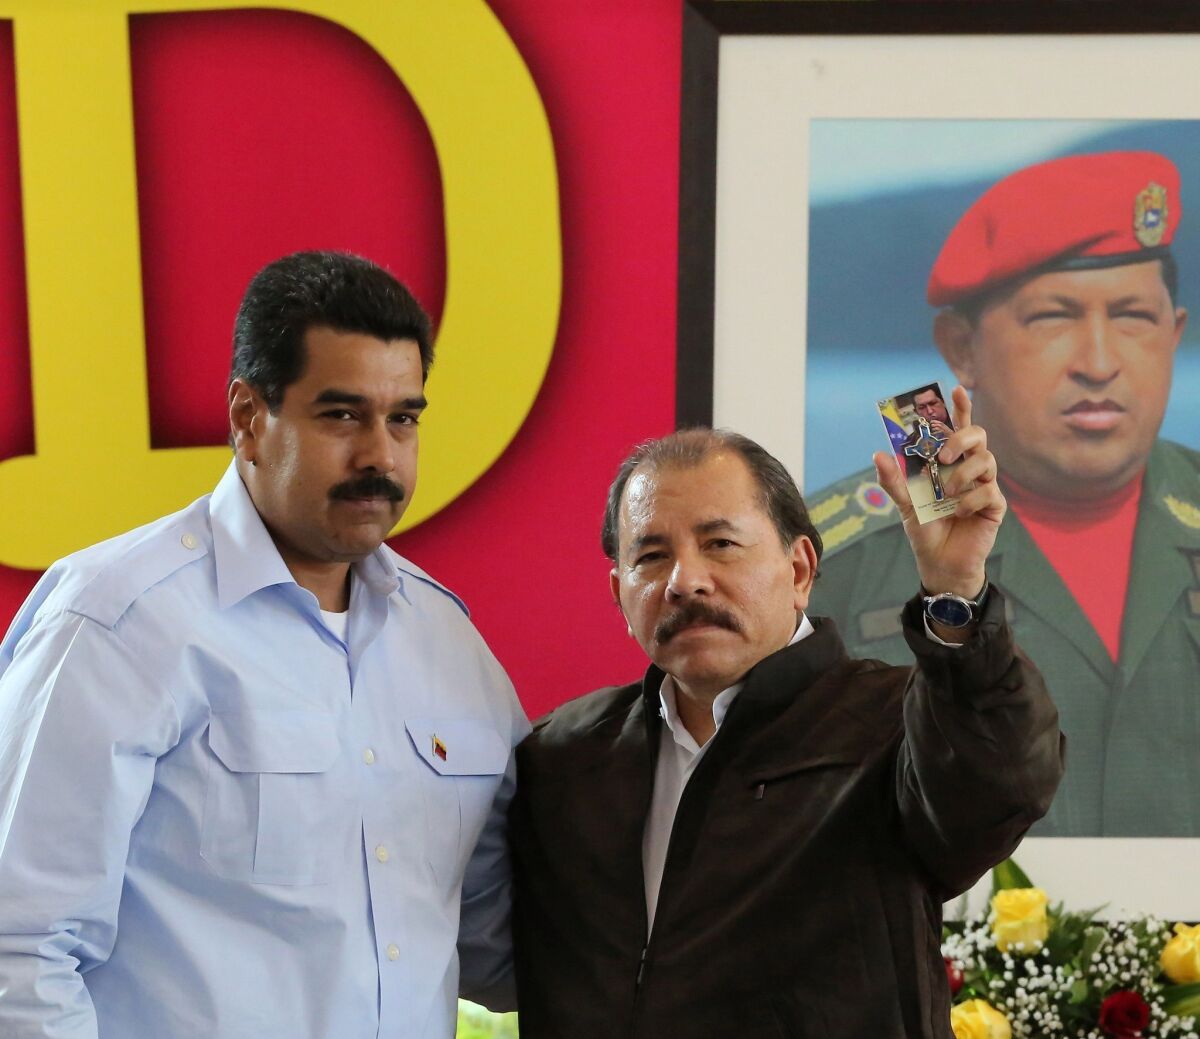 Venezuelan President Nicolas Maduro, left, and Nicaraguan President Daniel Ortega, seen at a meeting last month, have both offered asylum to U.S. intelligence leaker Edward Snowden, who is believed to have been stranded at a Moscow airport since June 23.